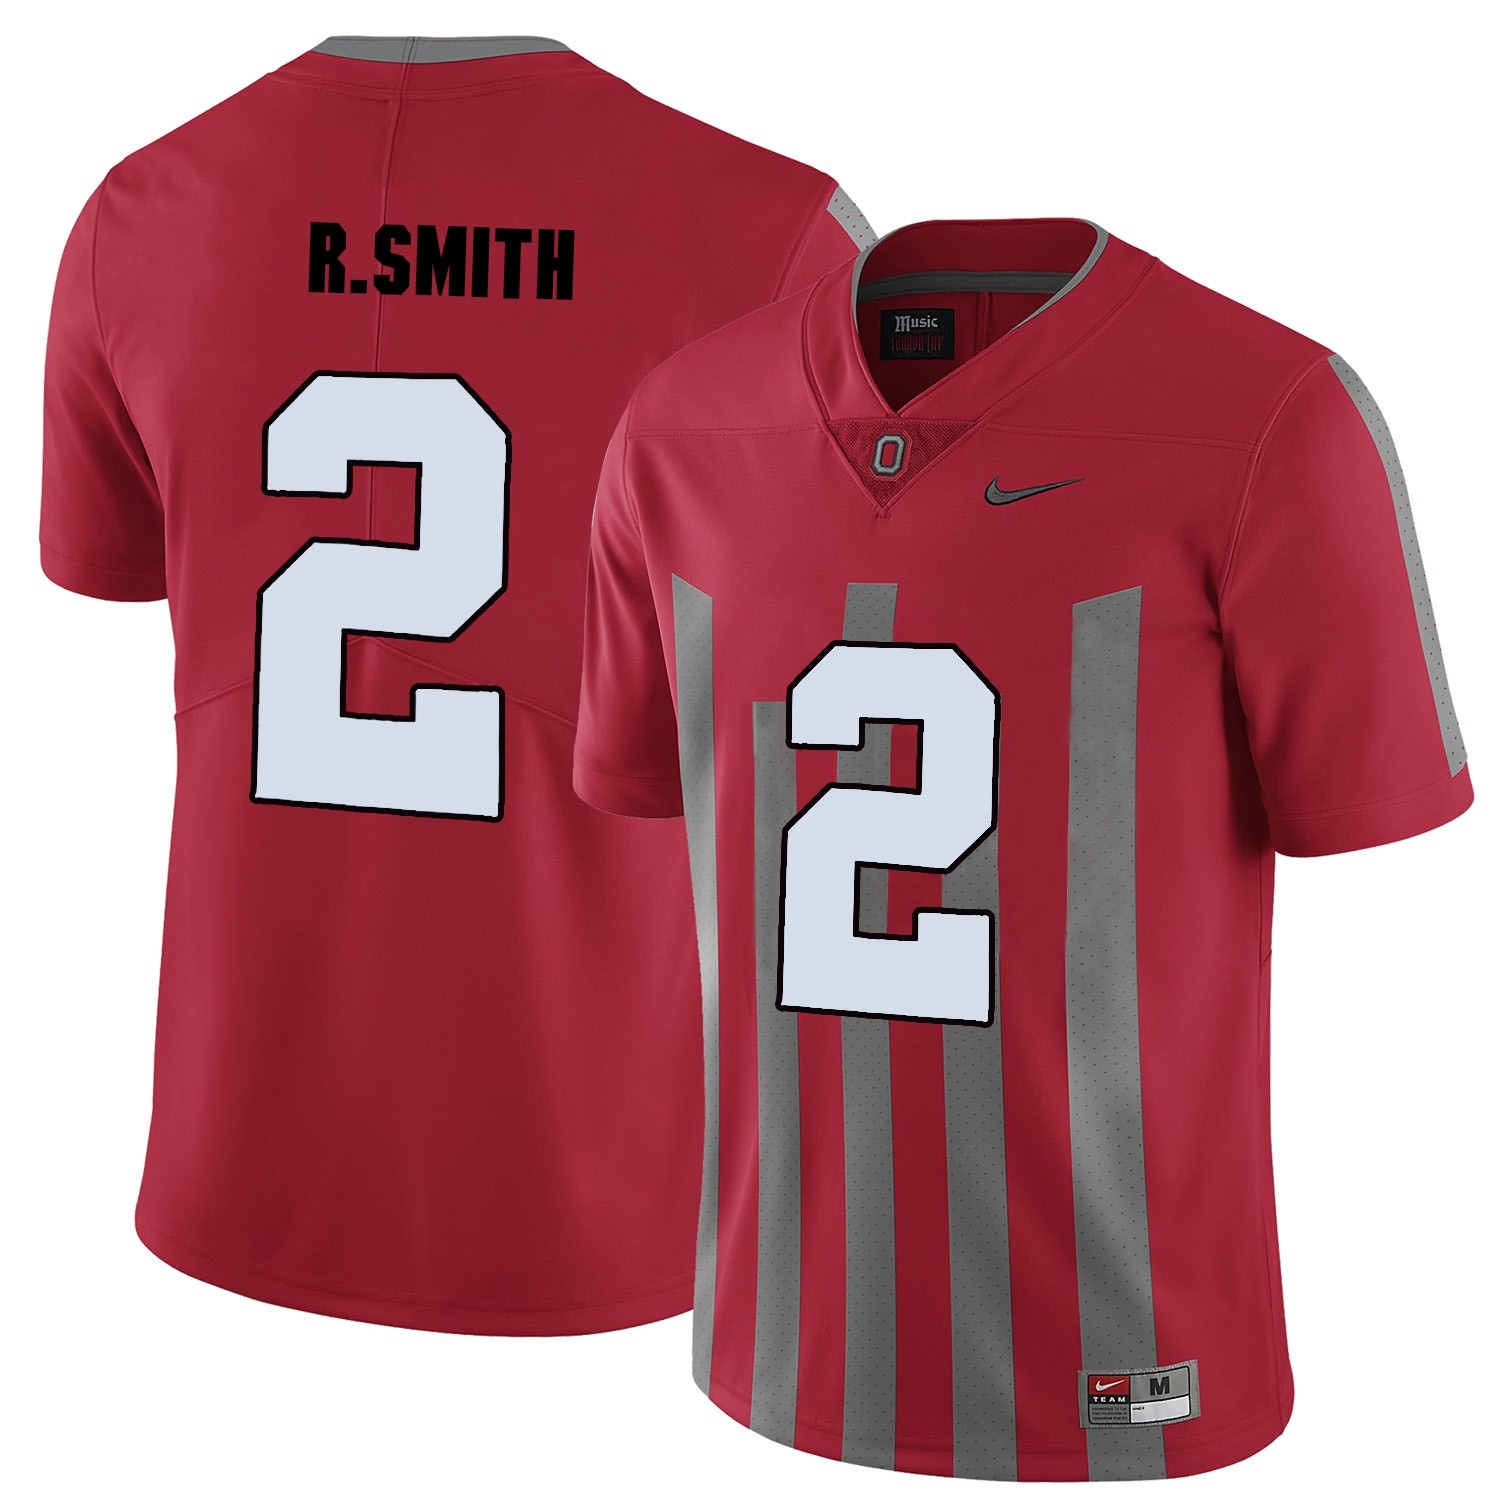 Ohio State Buckeyes Men's NCAA Rod Smith #2 Red Elite College Football Jersey KBY1449TX